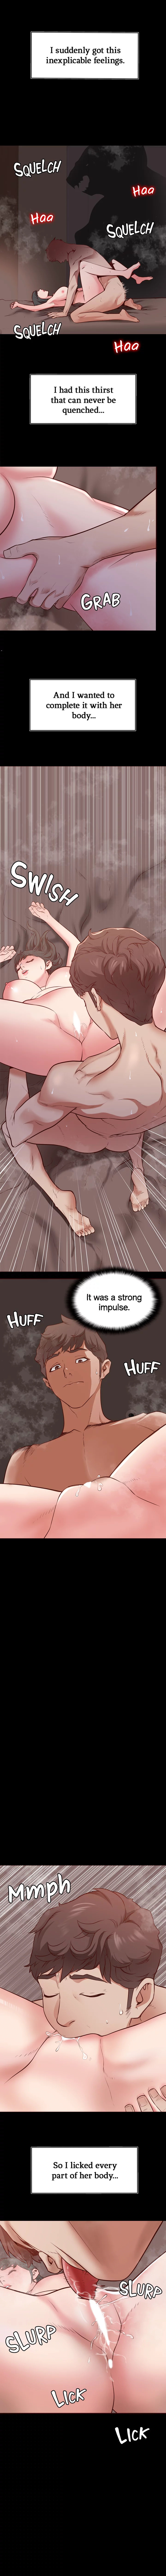 Wrath of the Underdog - Chapter 5 Page 6